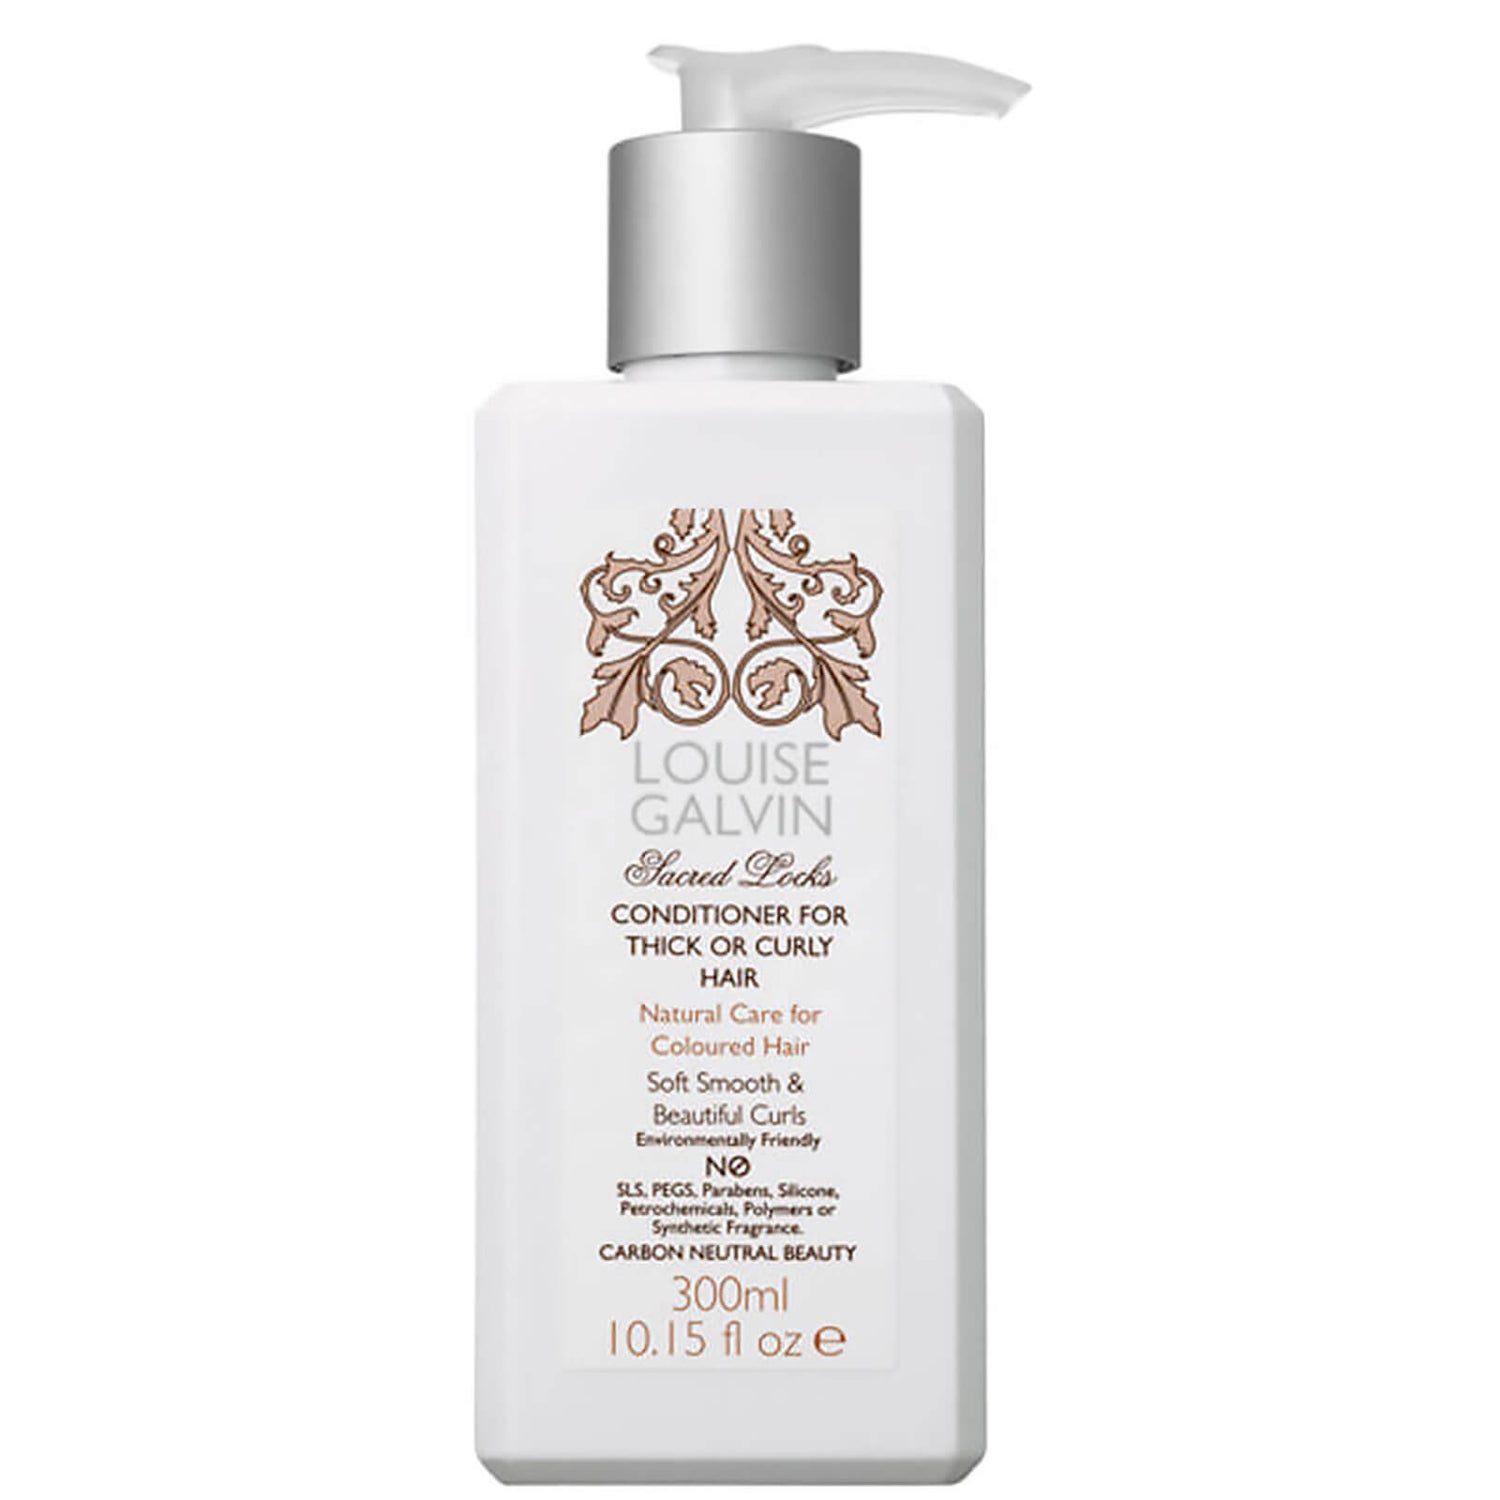 Louise Galvin Conditioner for Thick or Curly Hair 300 ml